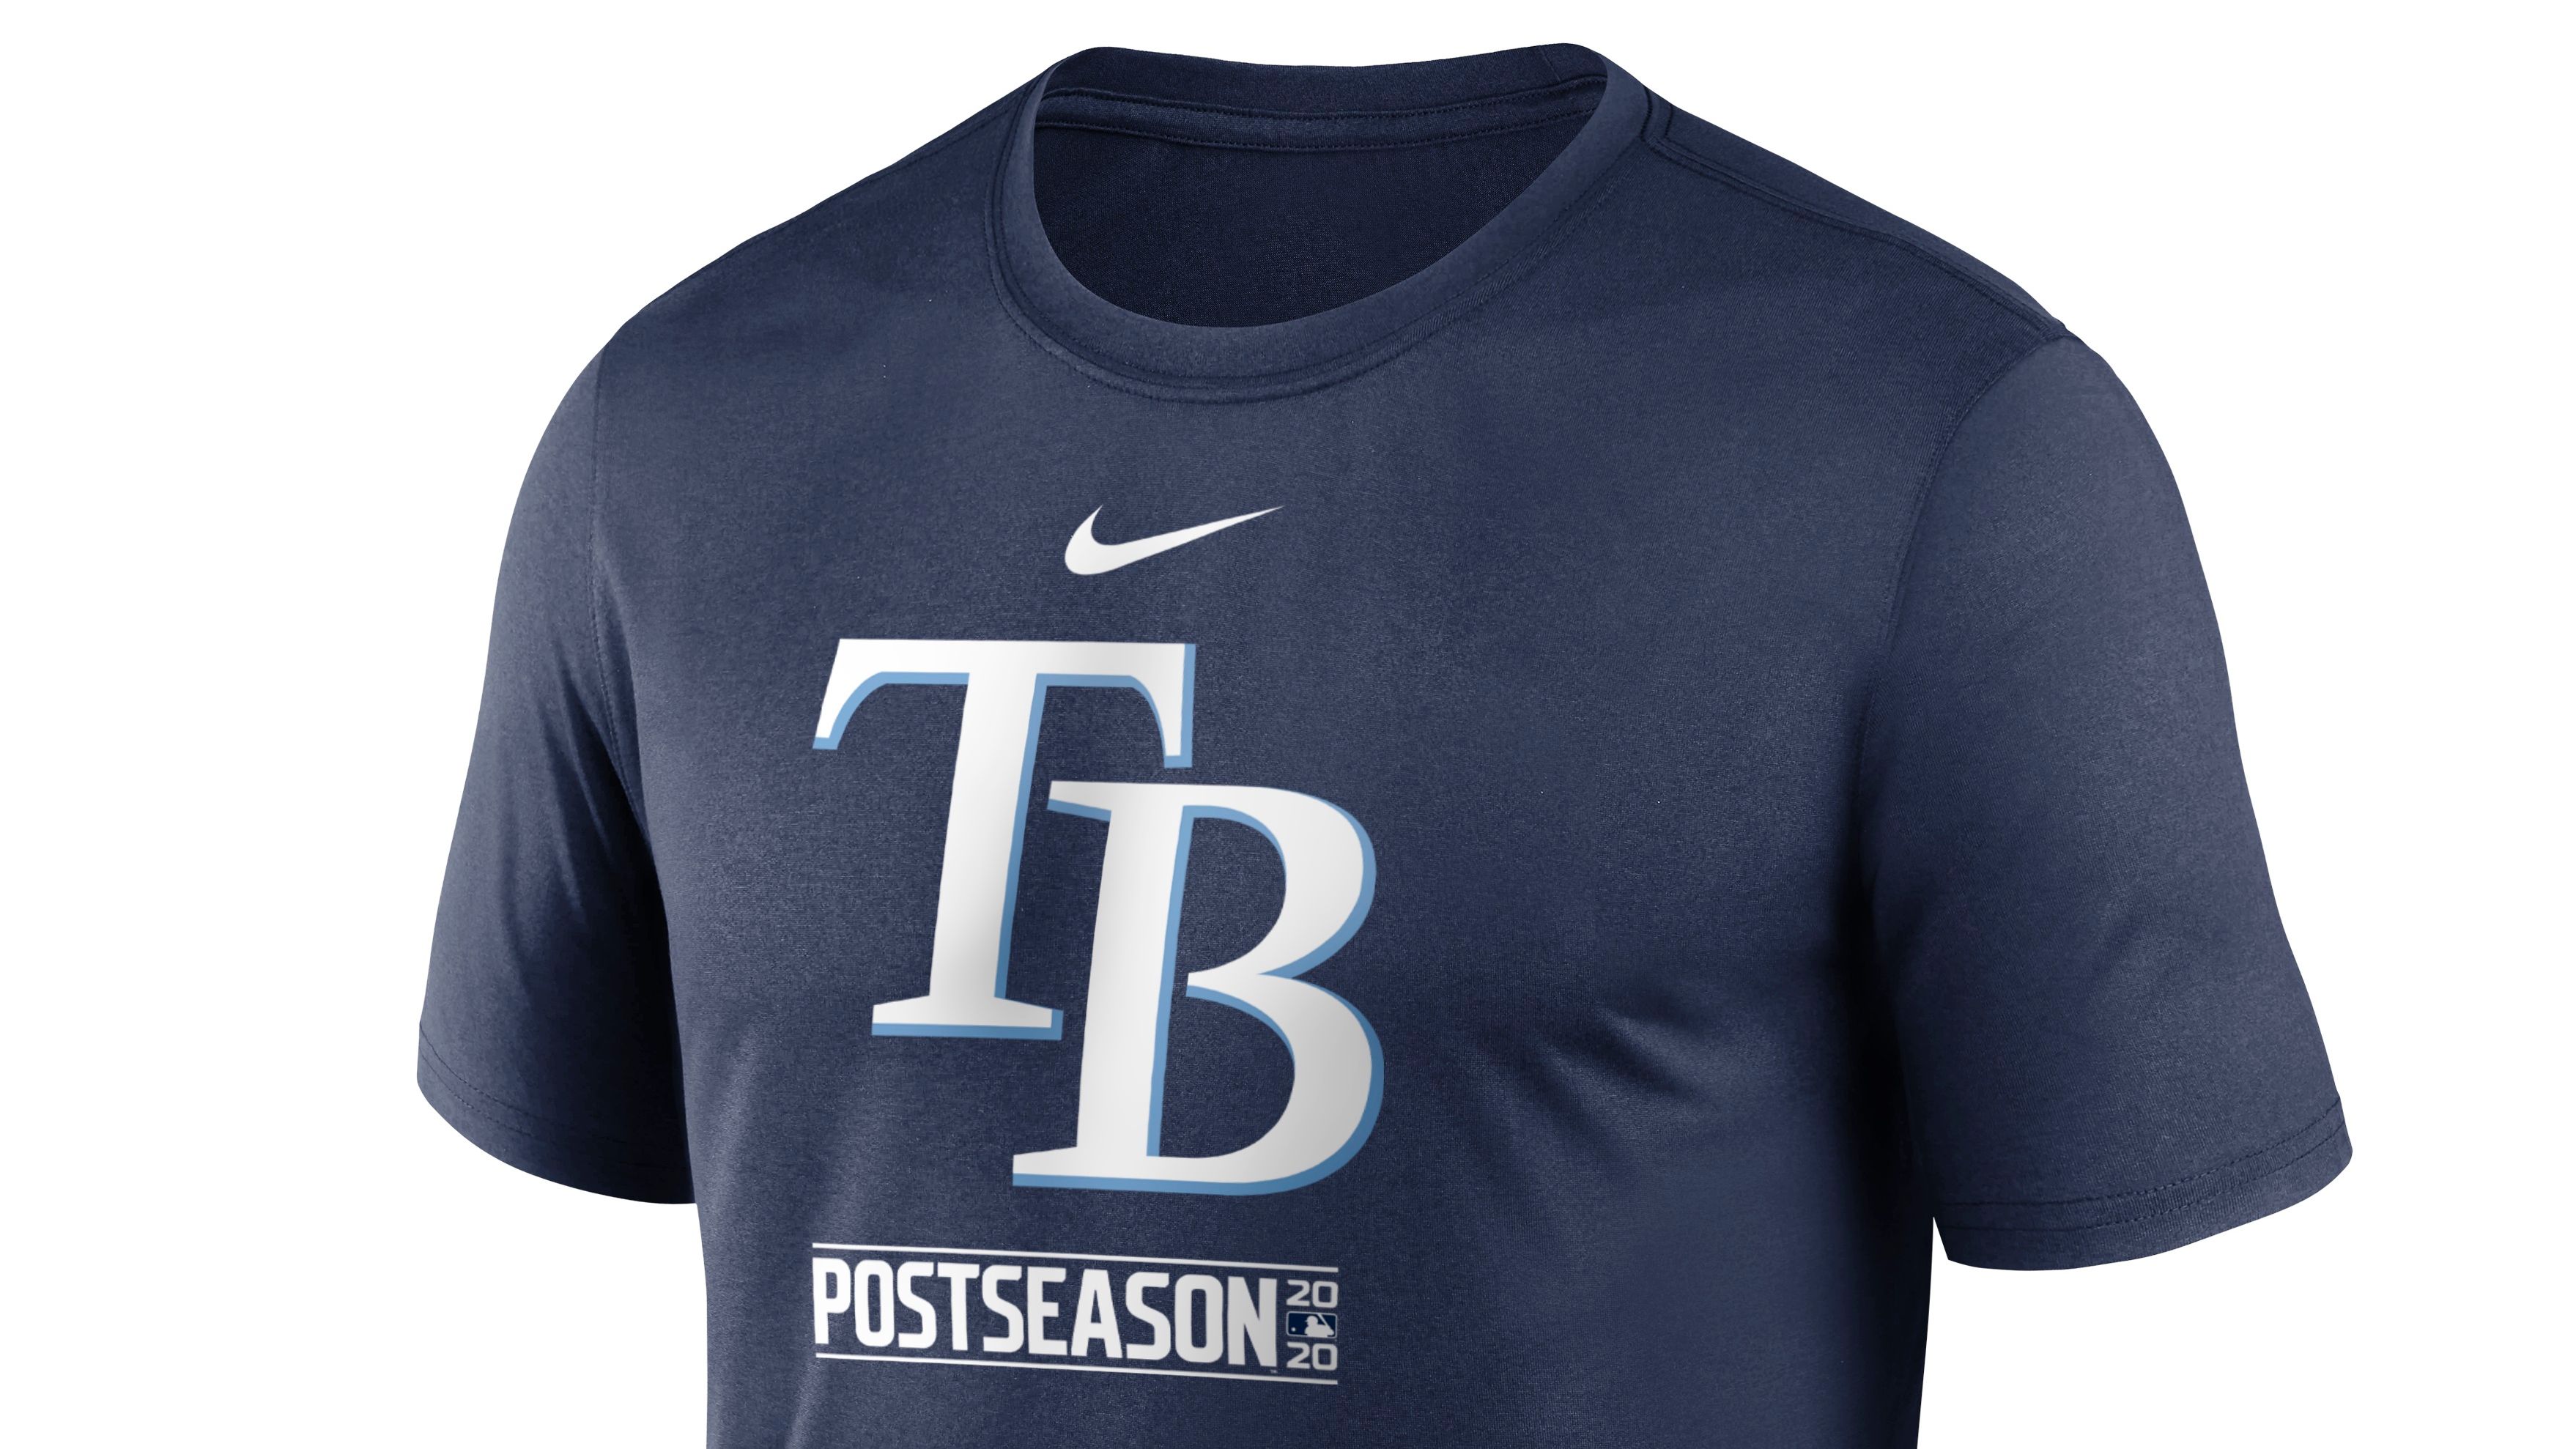 Rays re-open Tropicana Field store, plan pop-up sites